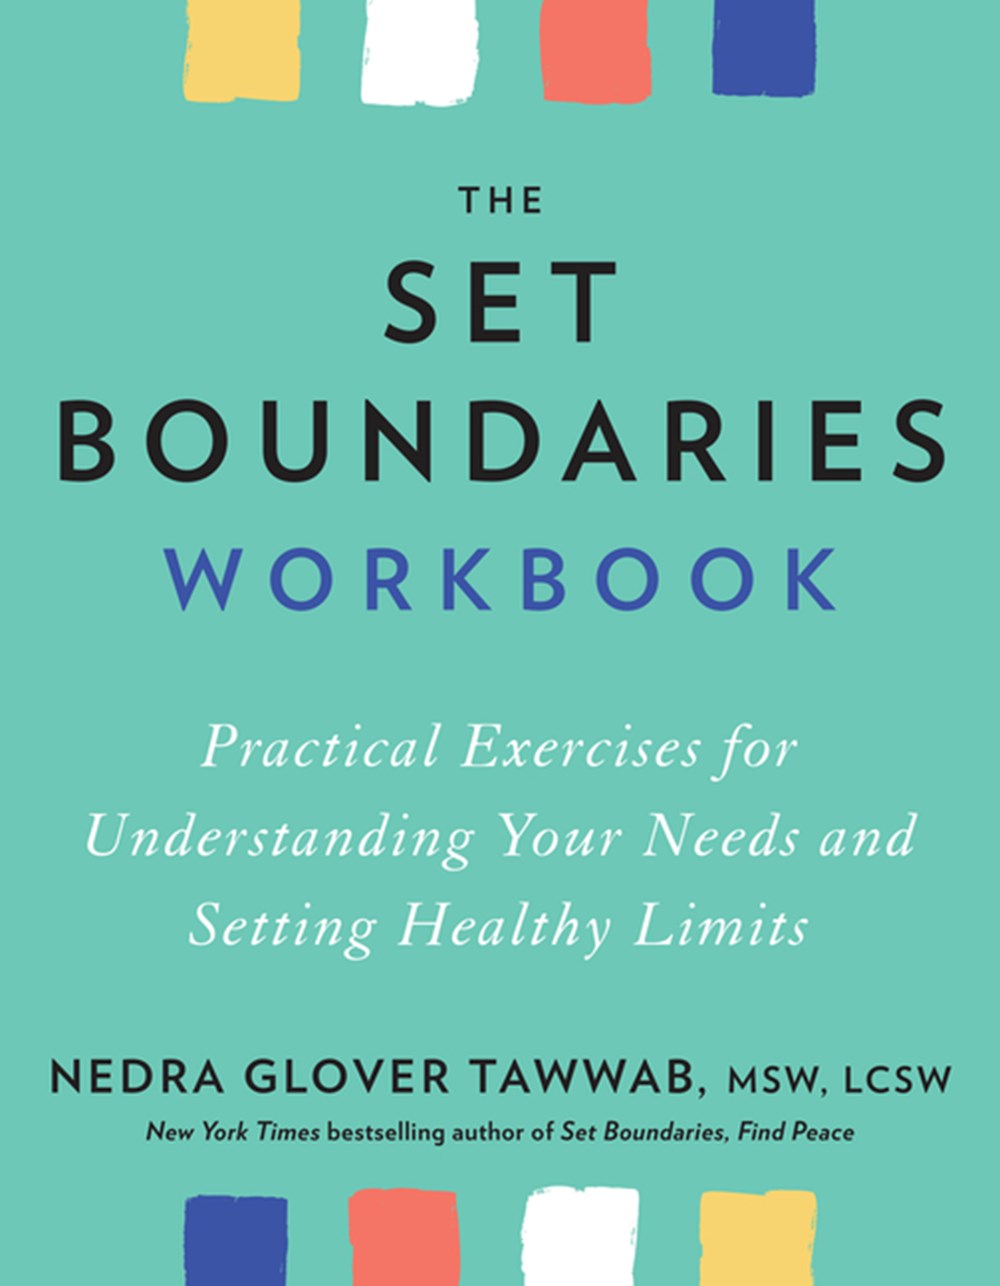 Set Boundaries Workbook: Practical Exercises for Understanding Your Needs and Setting Healthy Limits